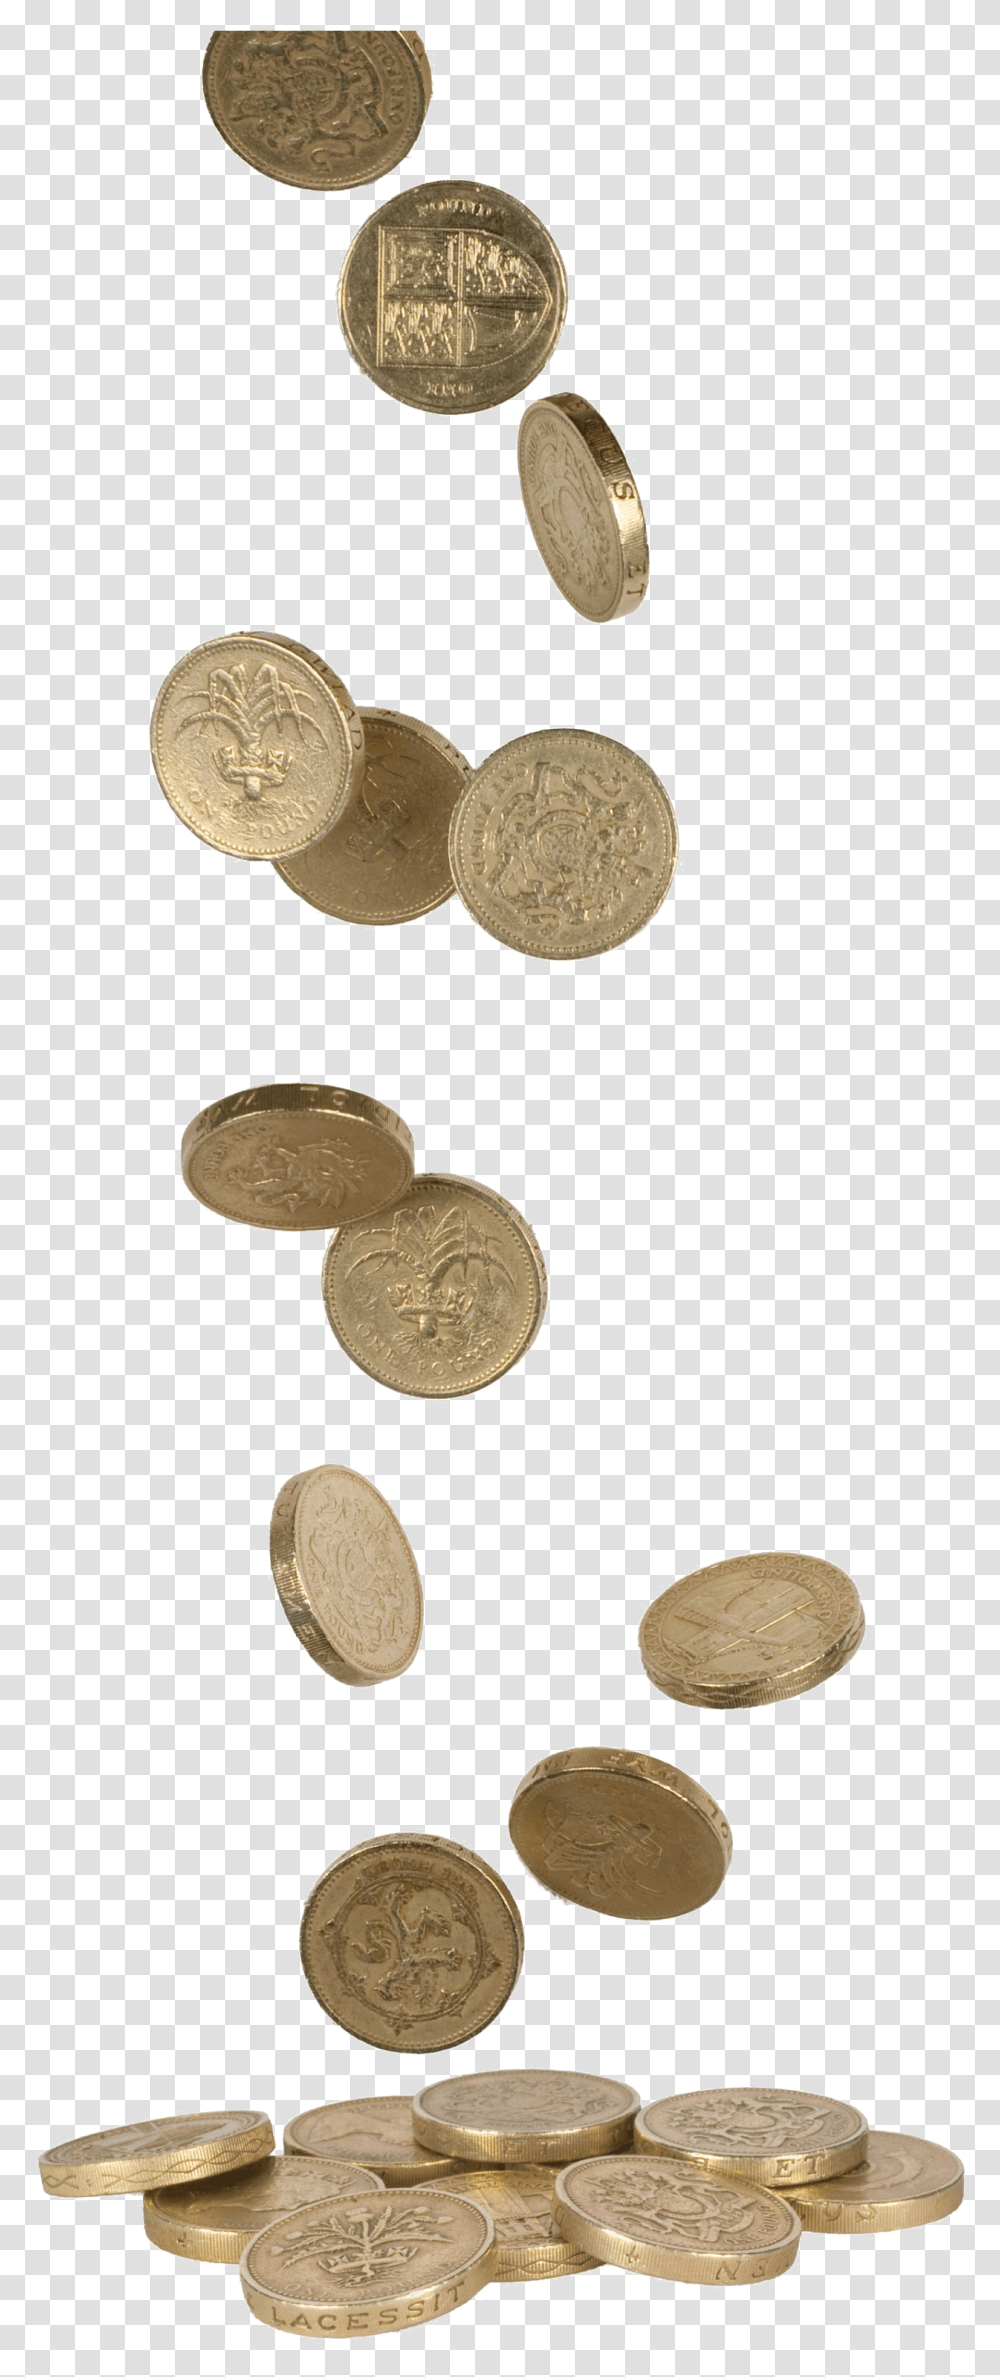 Falling Coins Download Image Money Coins Falling, Nickel, Dime, Treasure Transparent Png